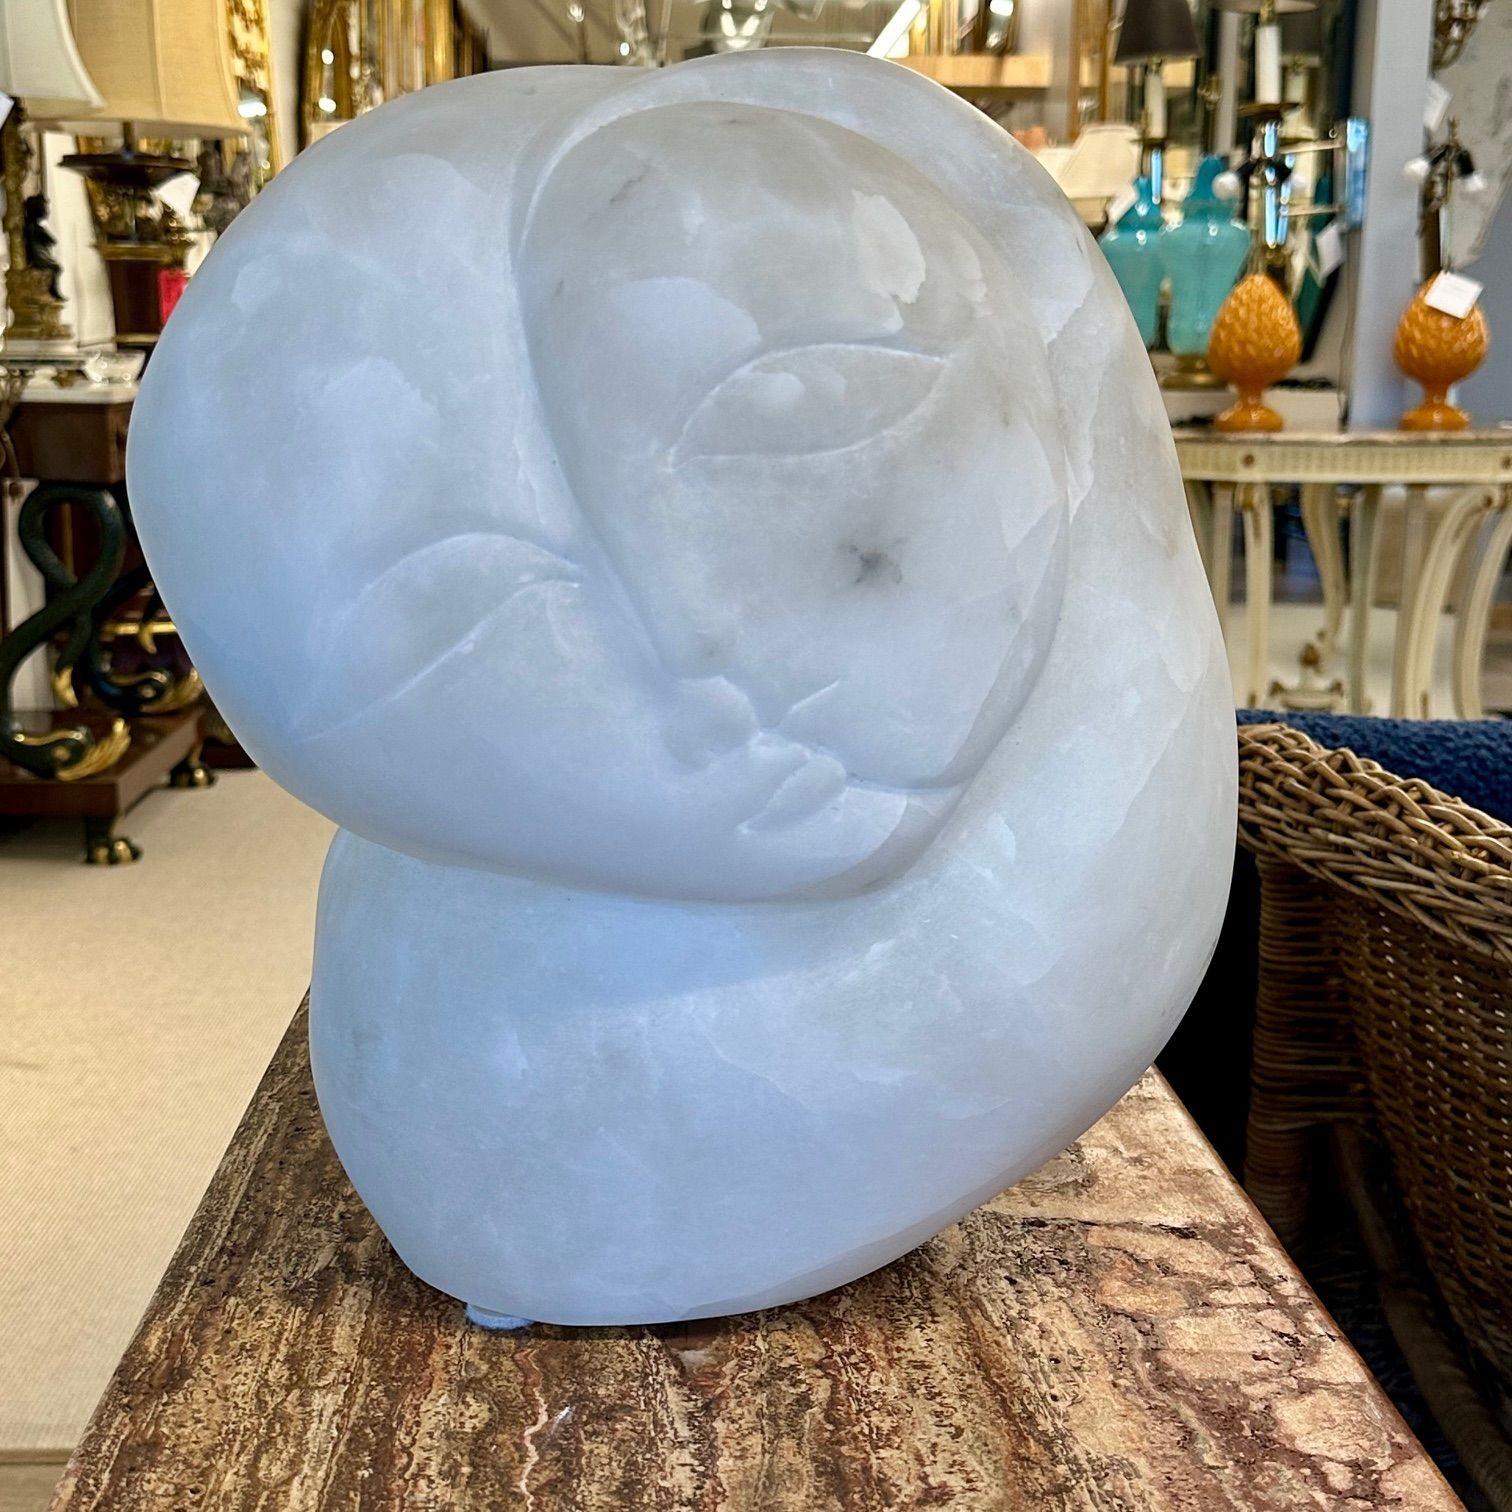 Contemporary Figural Marble Bust Depicting Heart Shaped Face Signed Forma

15H x 12.5W x 10D